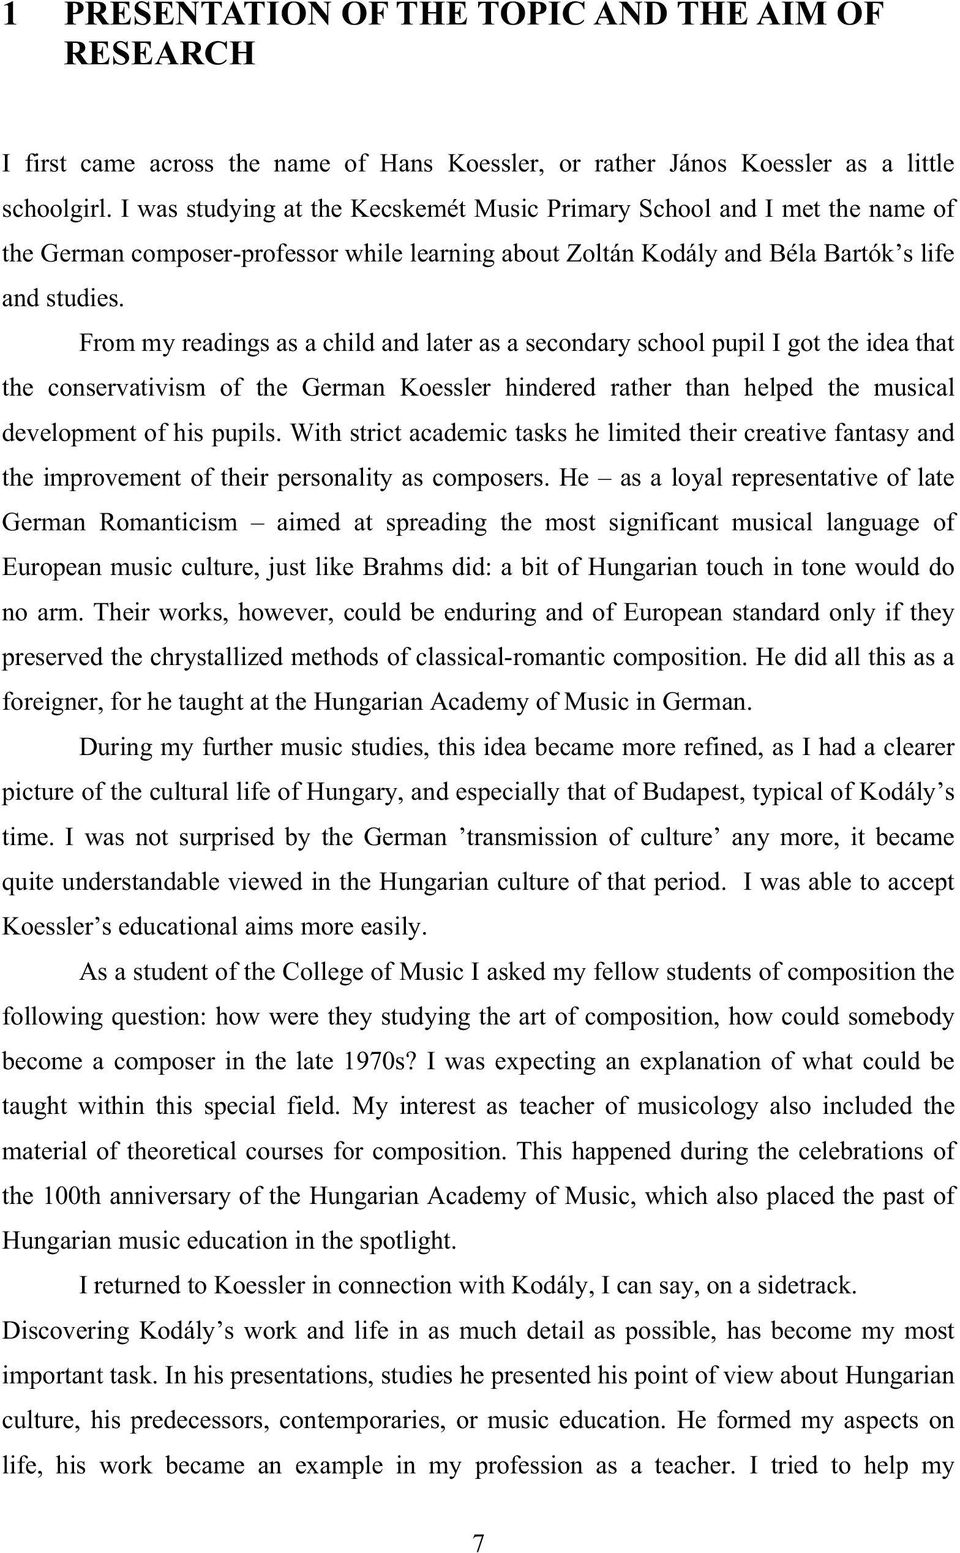 From my readings as a child and later as a secondary school pupil I got the idea that the conservativism of the German Koessler hindered rather than helped the musical development of his pupils.